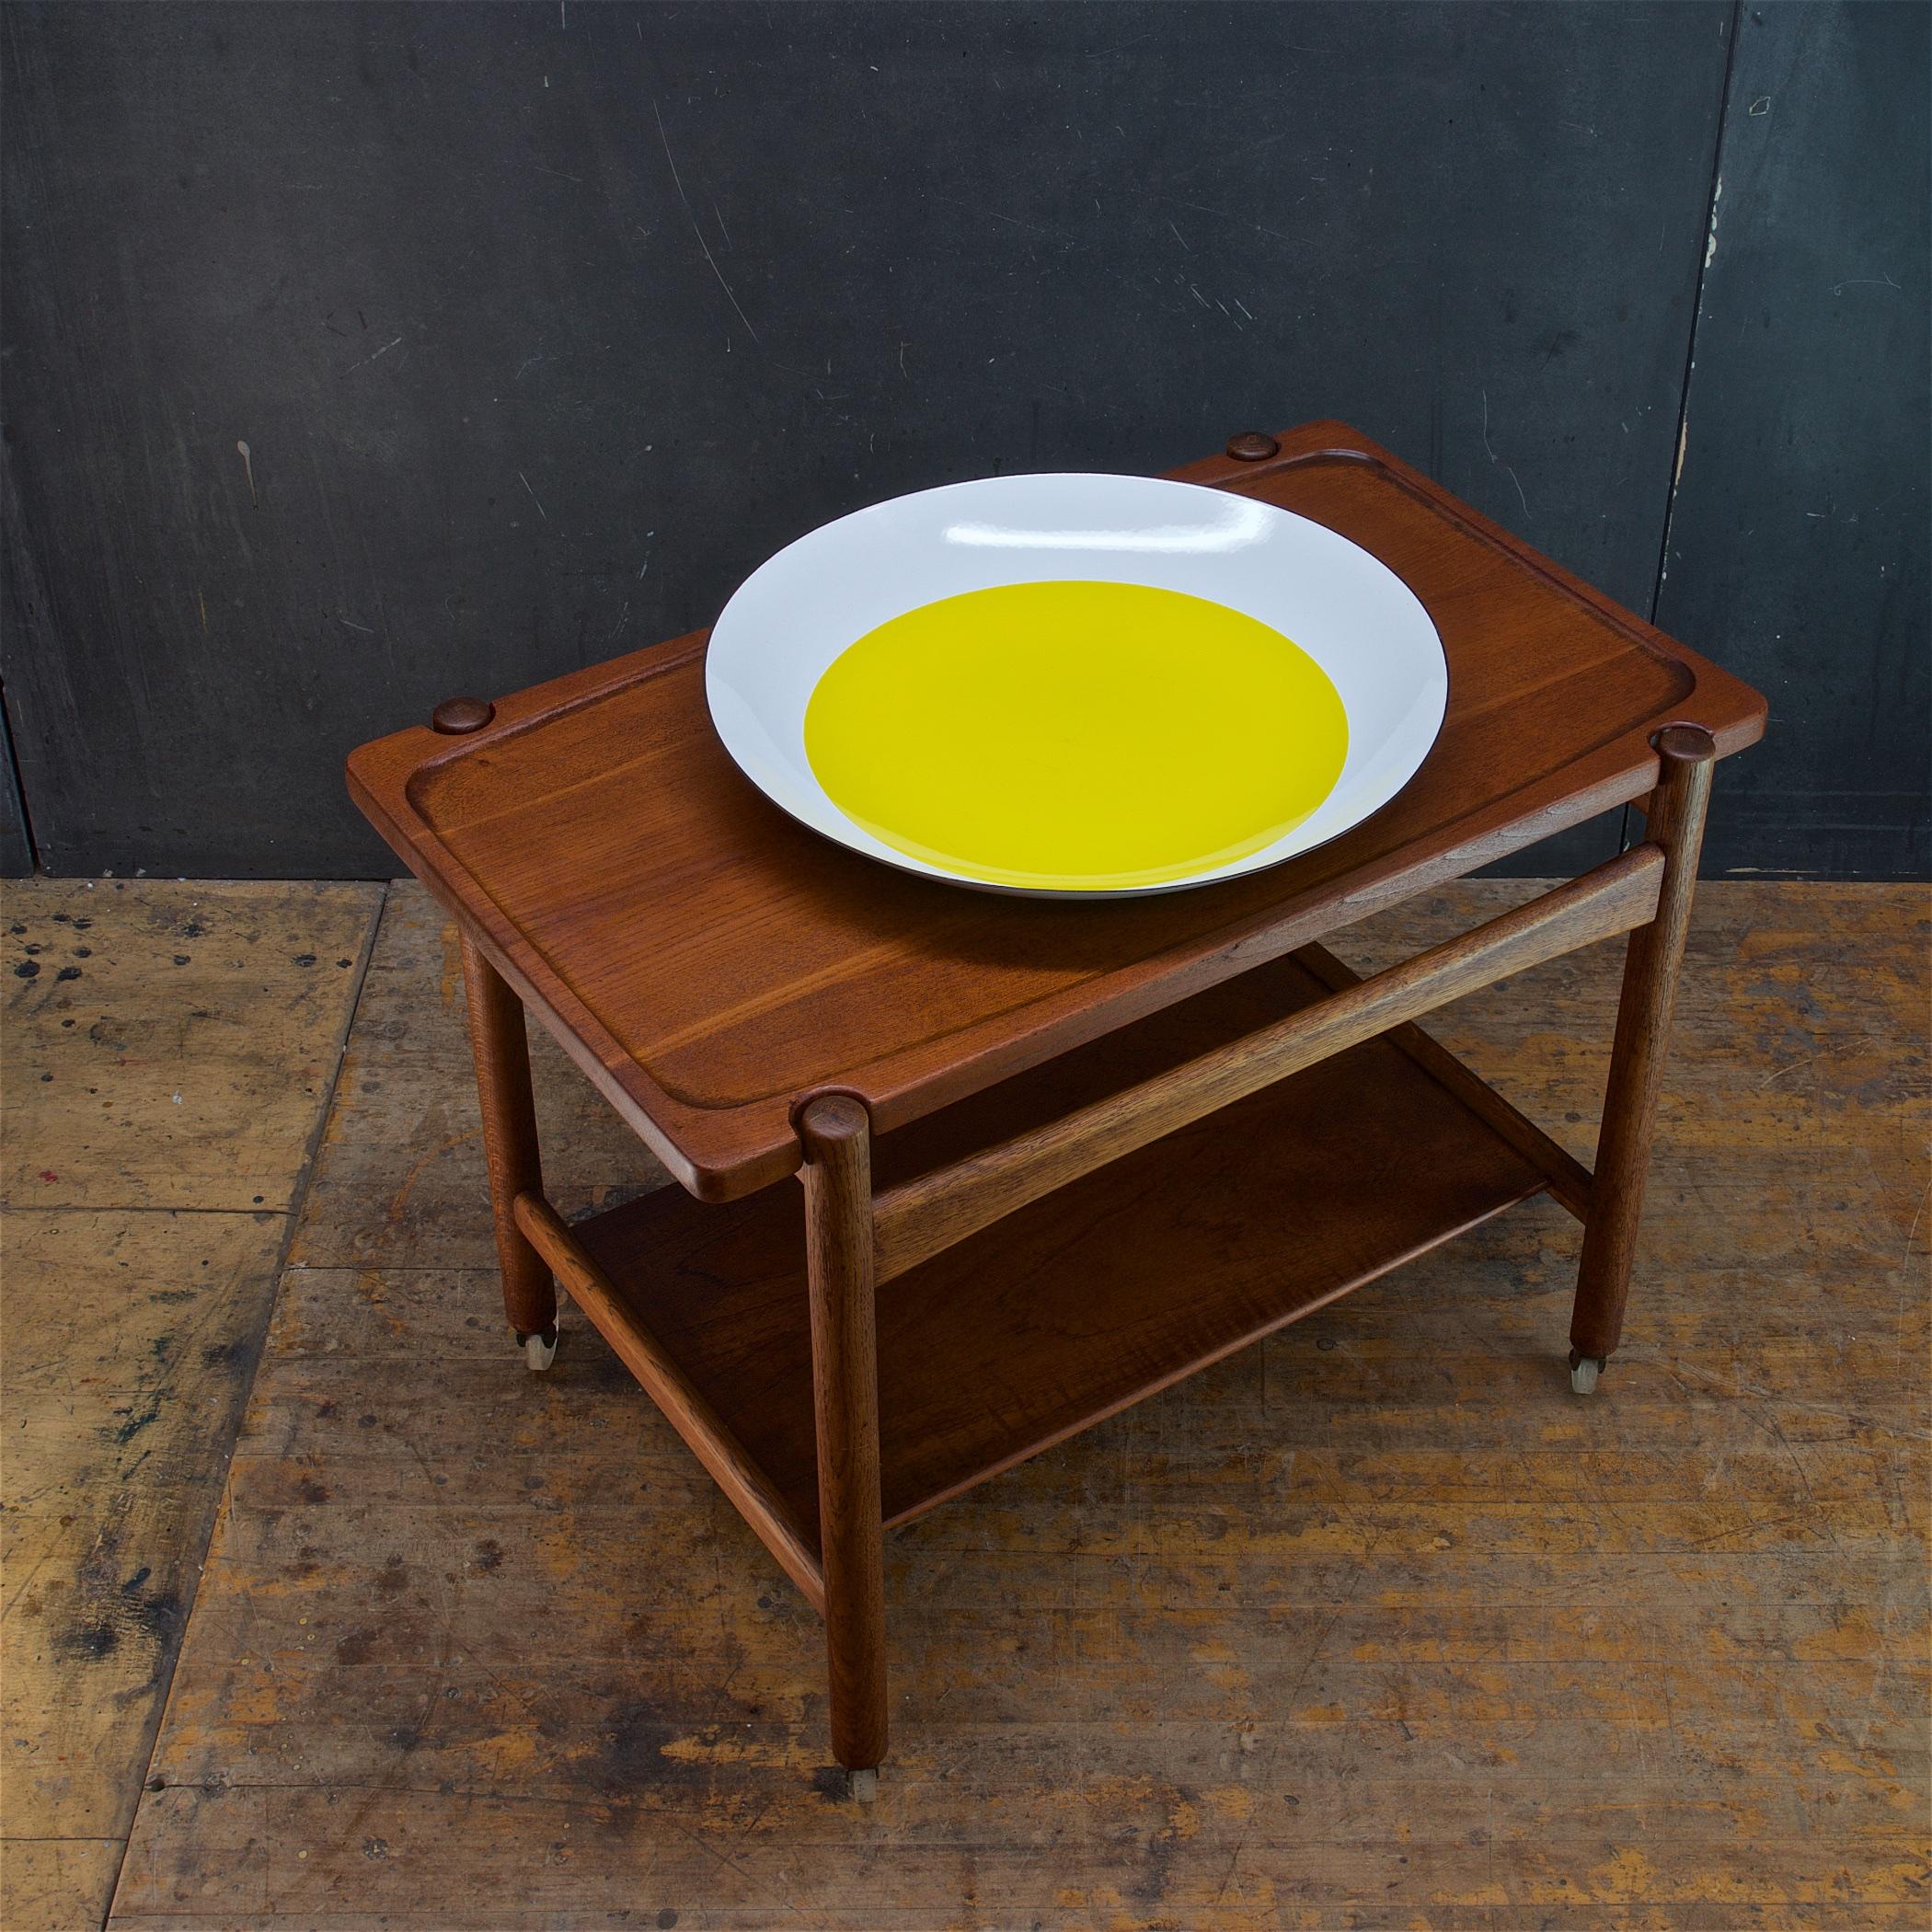 Large pressed steel serving bowl enameled with white and a bright yellow center. Similar to the designs of Arne Clausen for Cathrineholm. This bowl appears to be unused and retains original label.